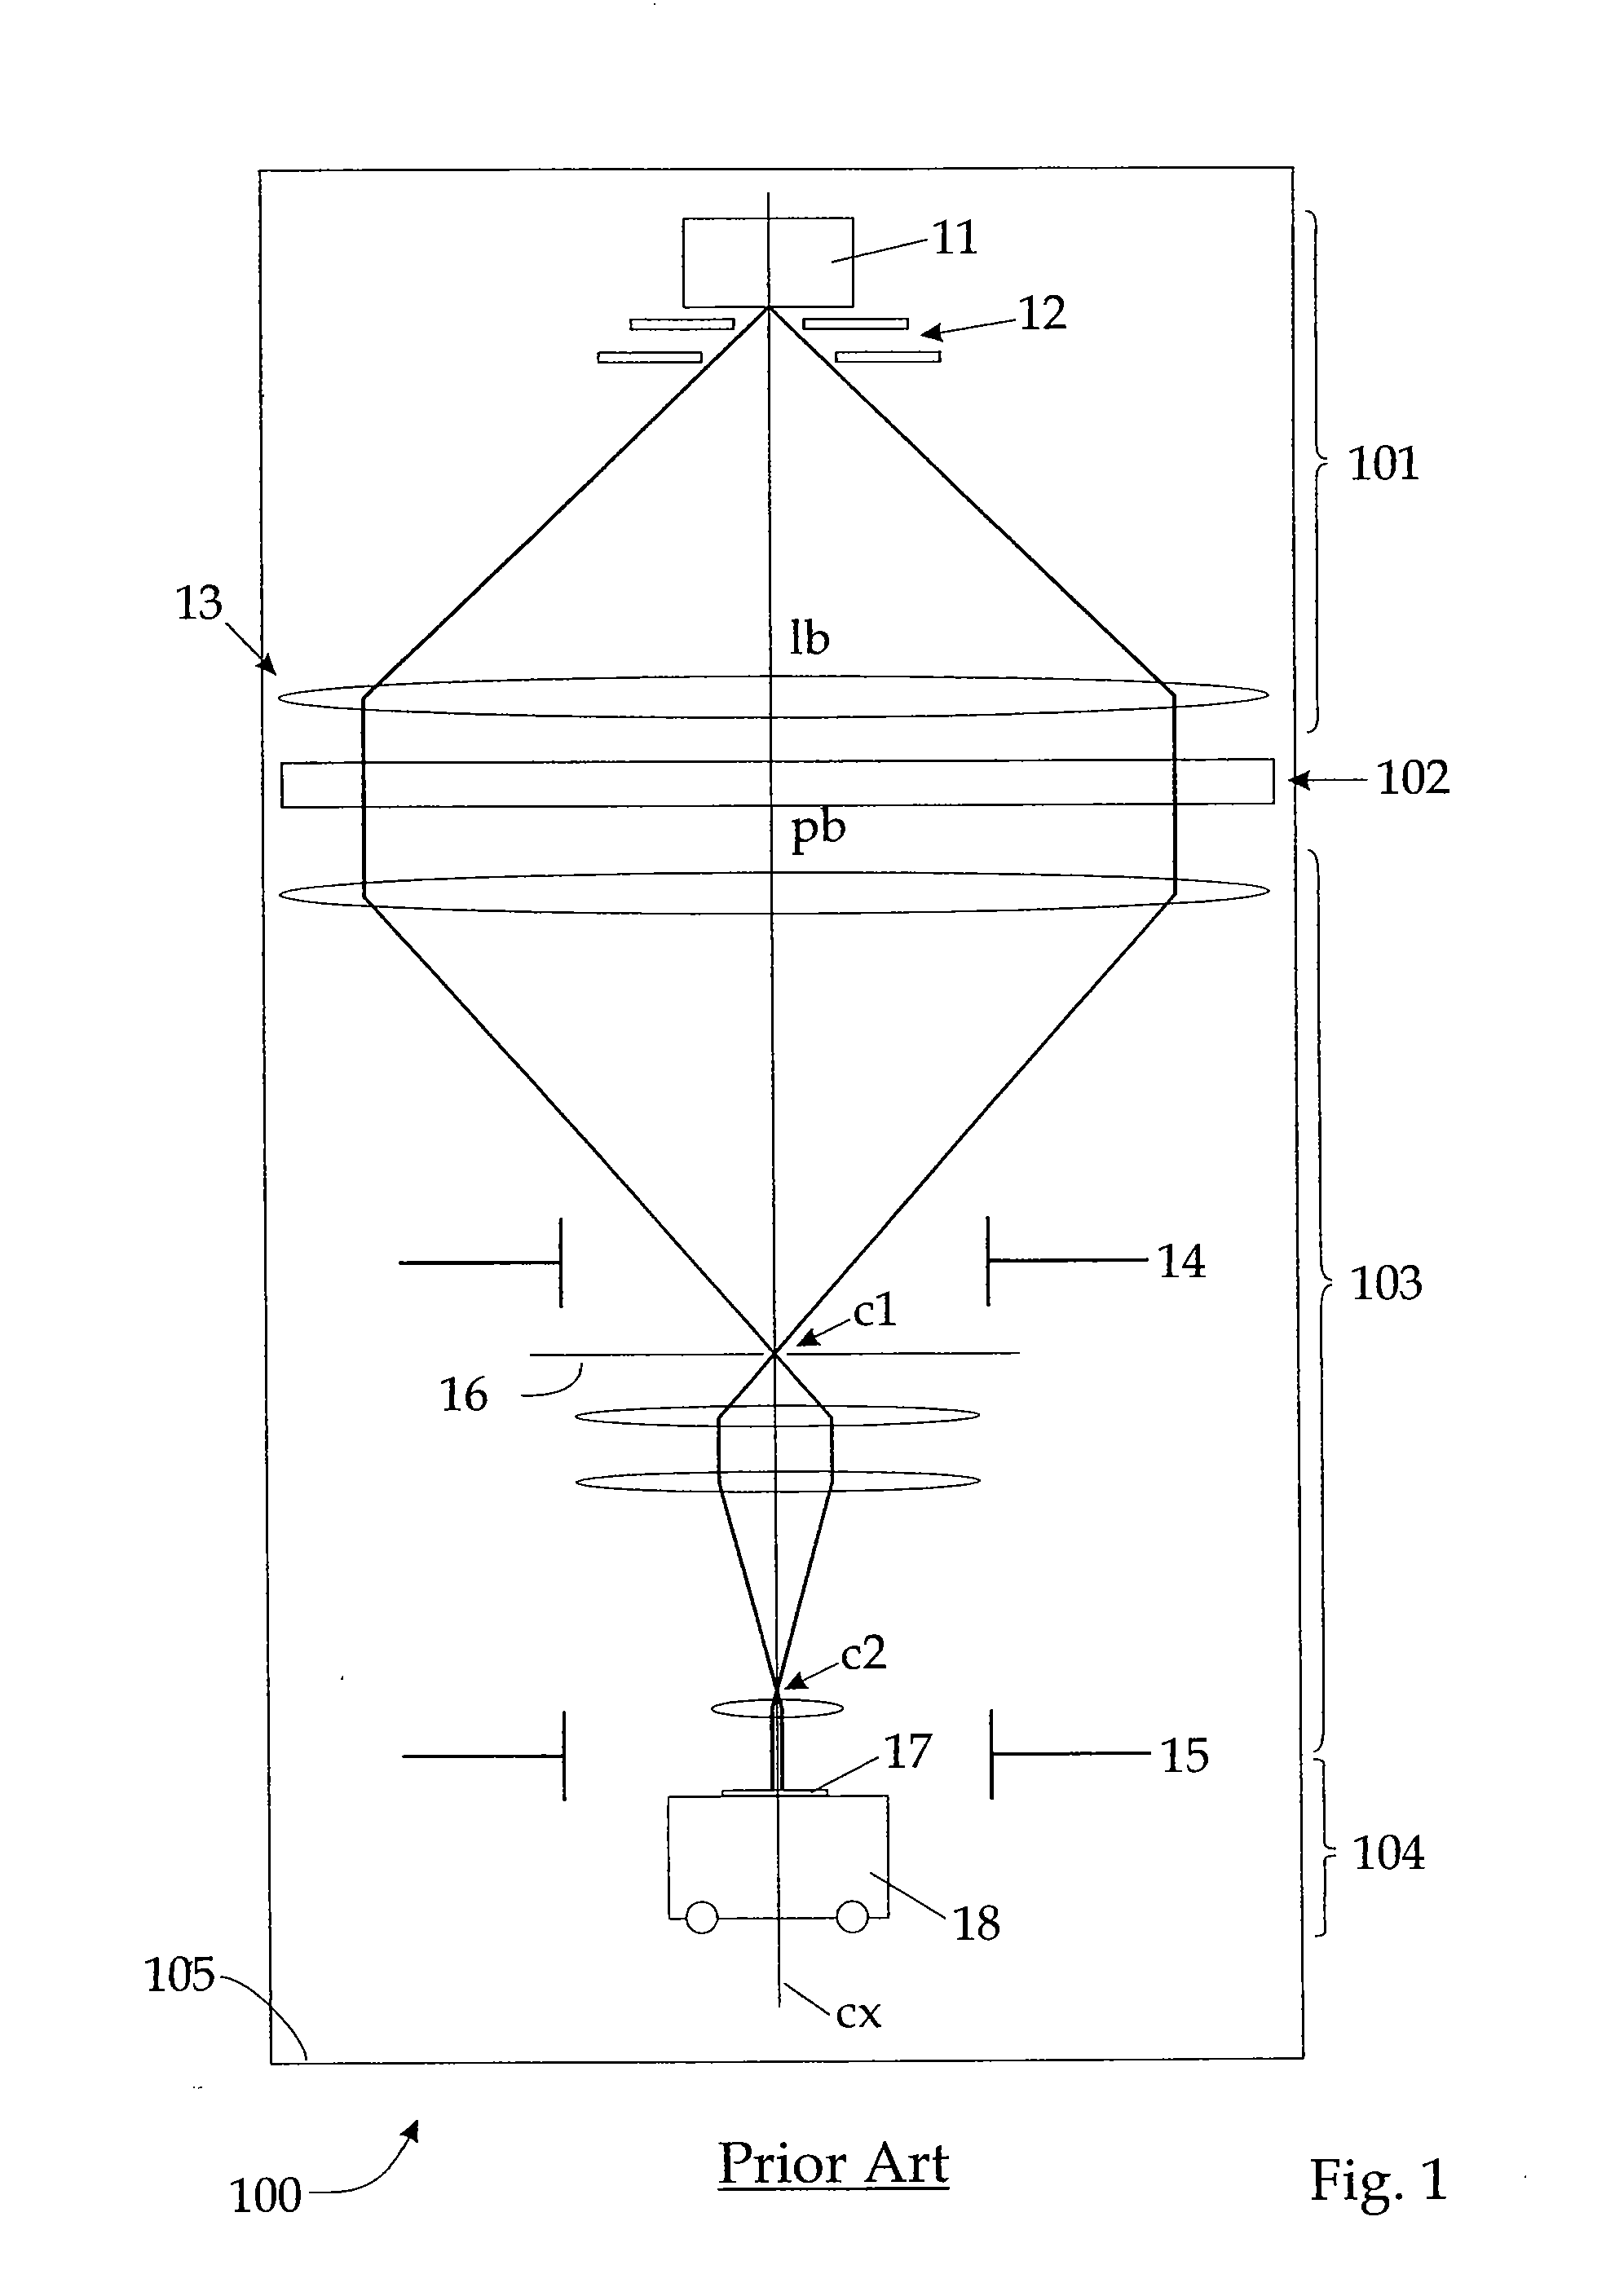 Multi-beam deflector array device for maskless particle-beam processing